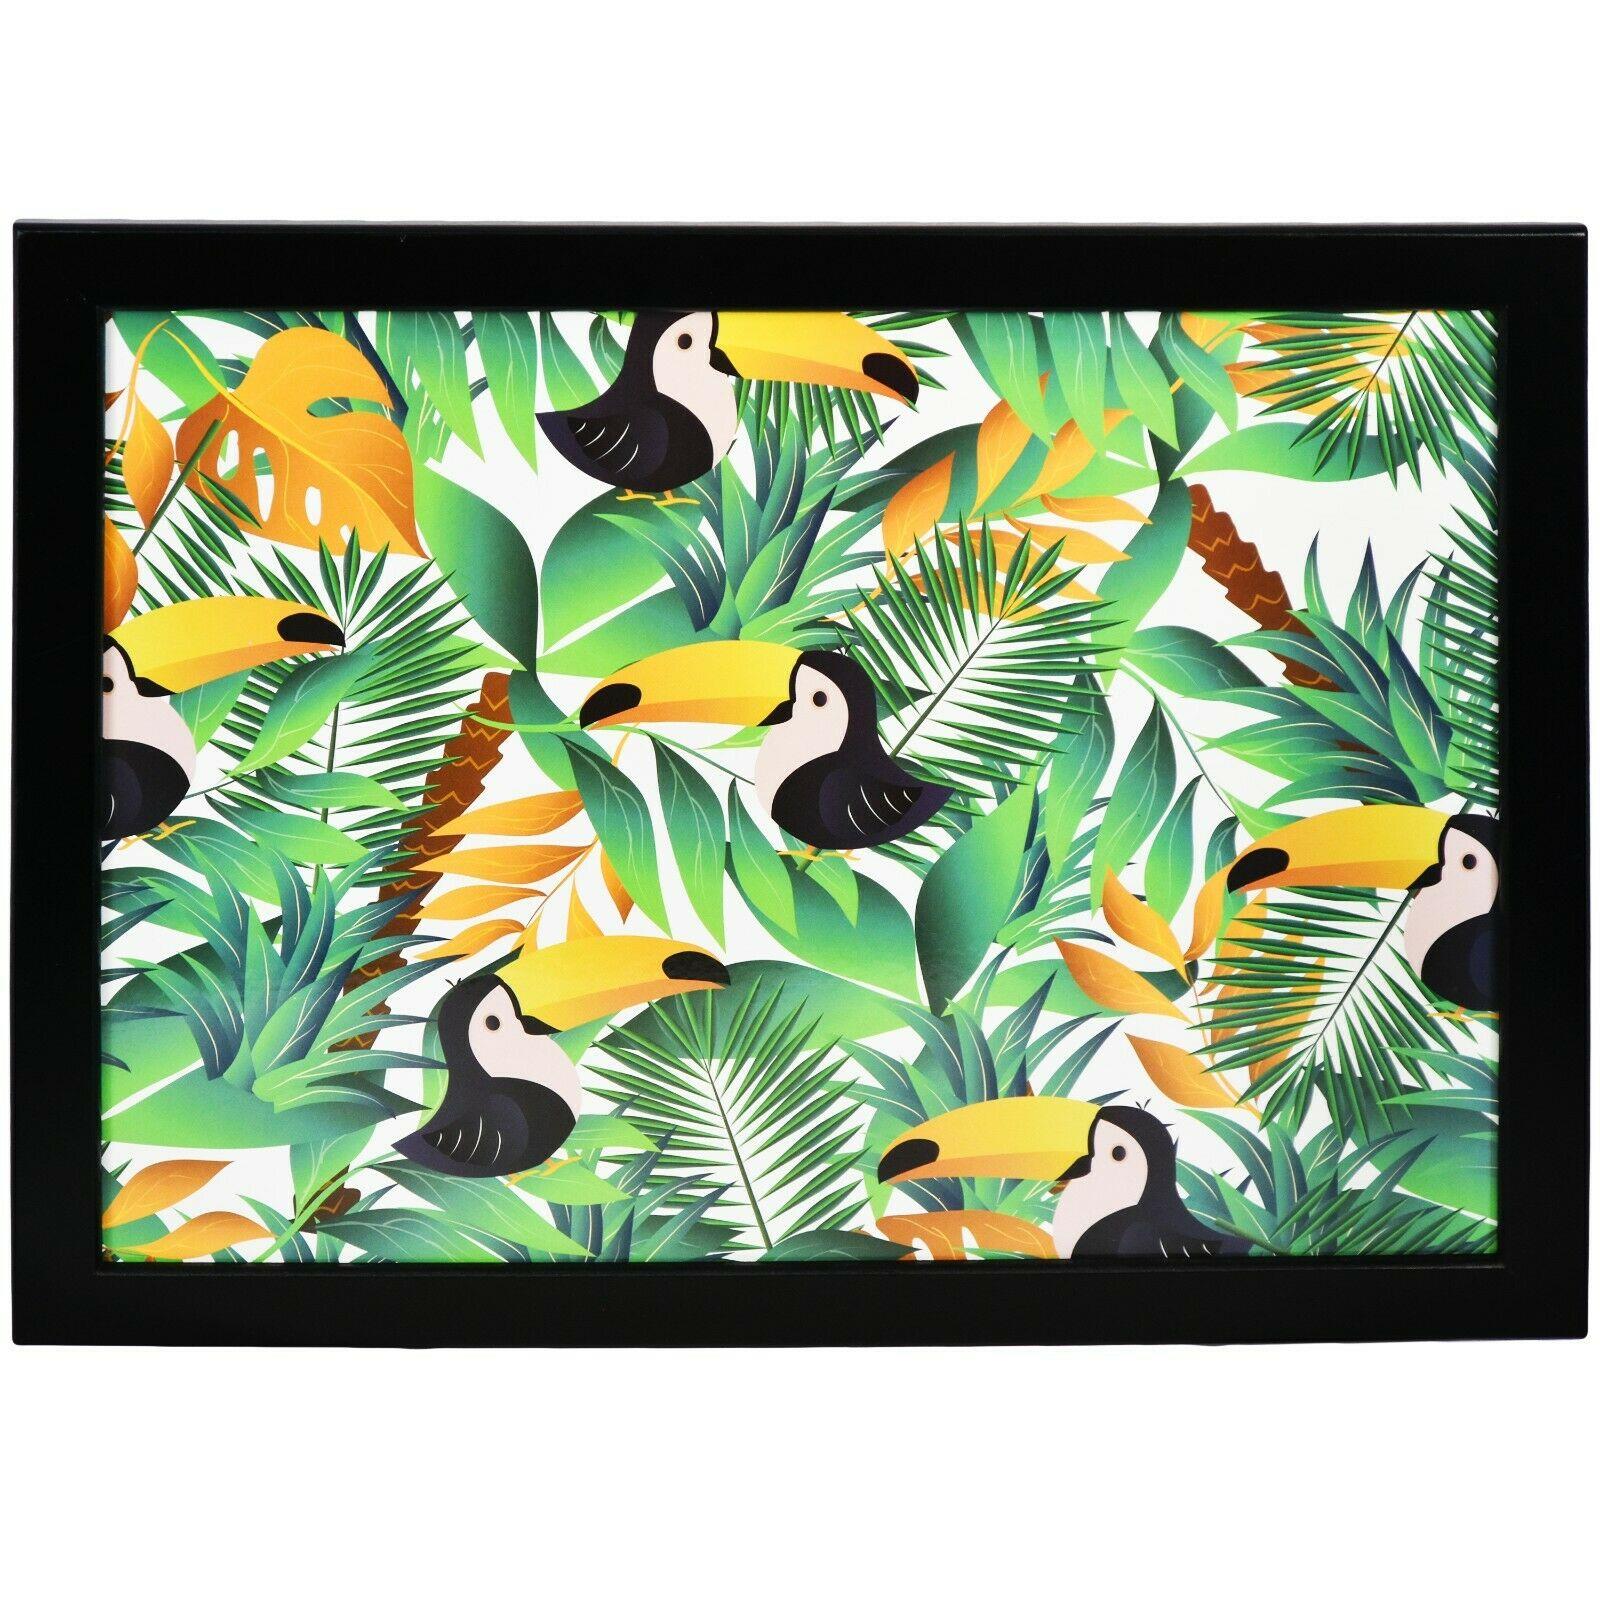 Tropical Lap Tray With Bean Bag Cushion by Geezy - UKBuyZone